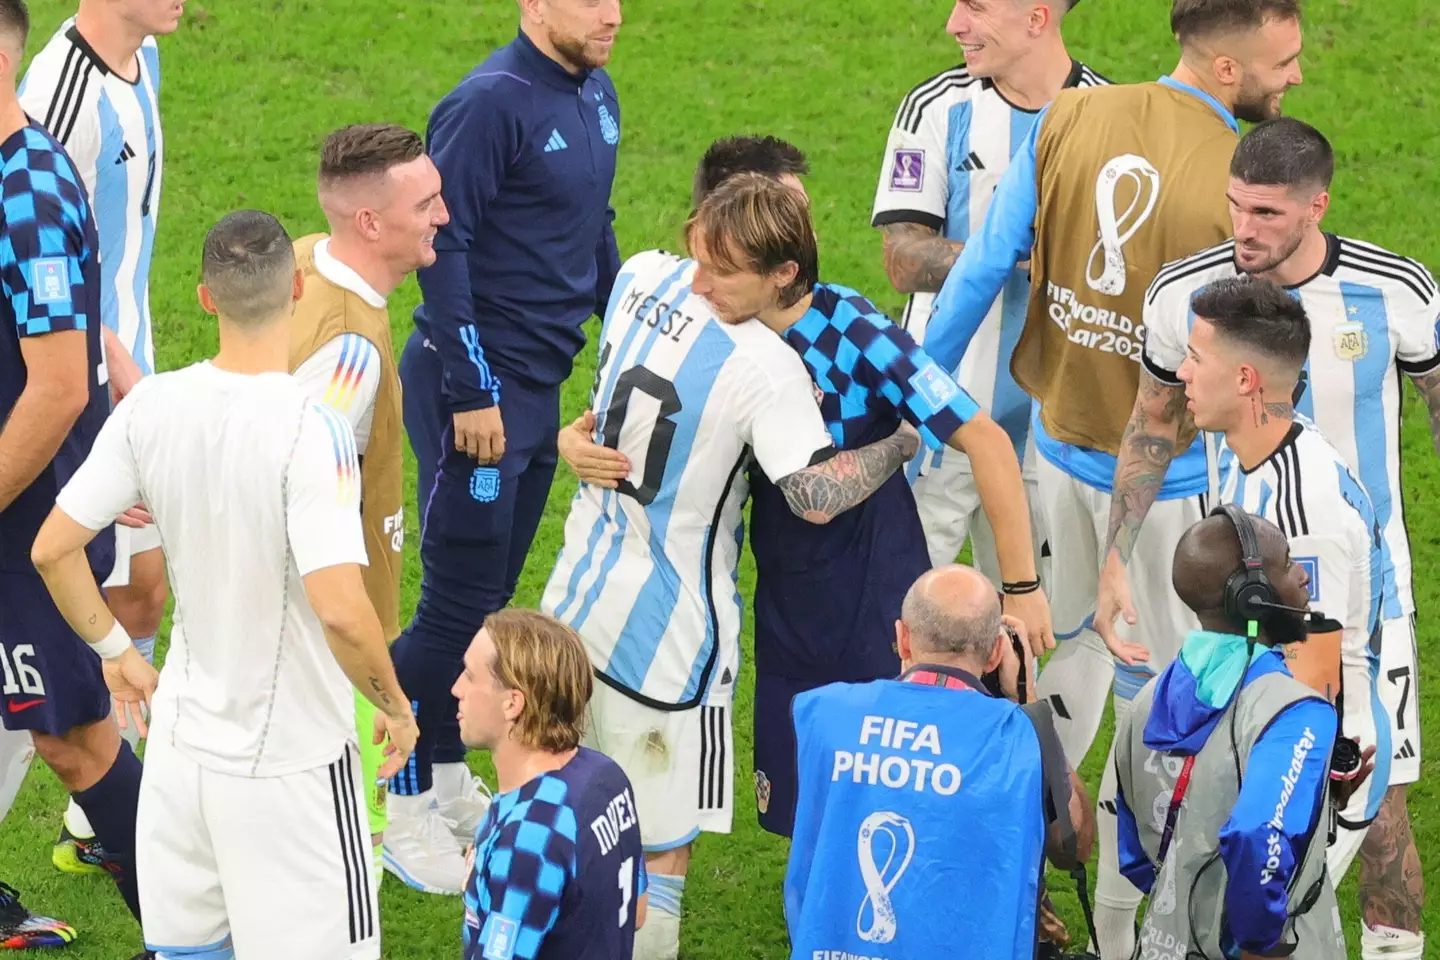 The two warriors, Messi and Modric, whose career paths have often crossed, show respect after the game. Image: Alamy